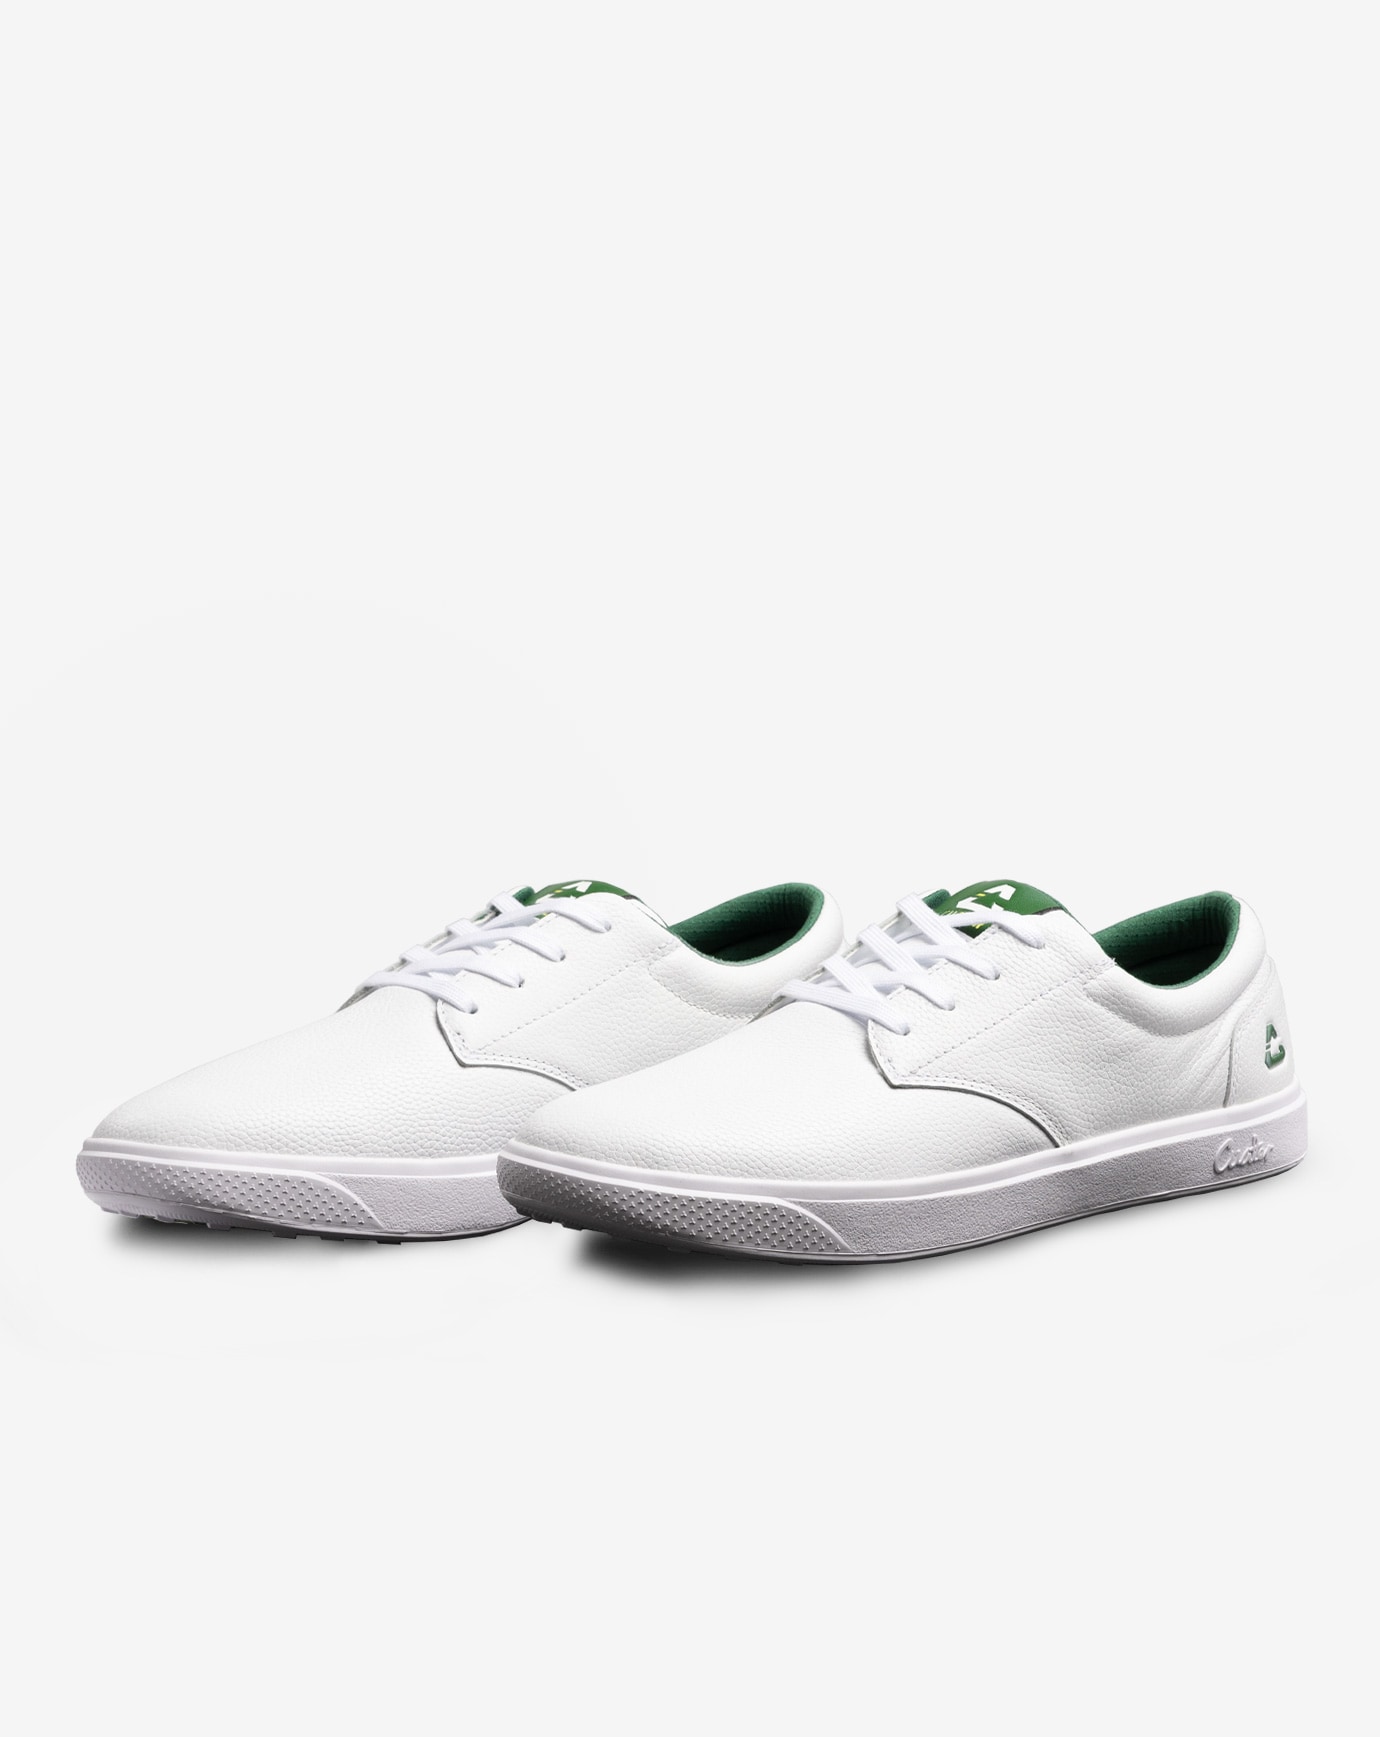 THE WILDCARD LEATHER SPIKELESS GOLF SHOE Image 5